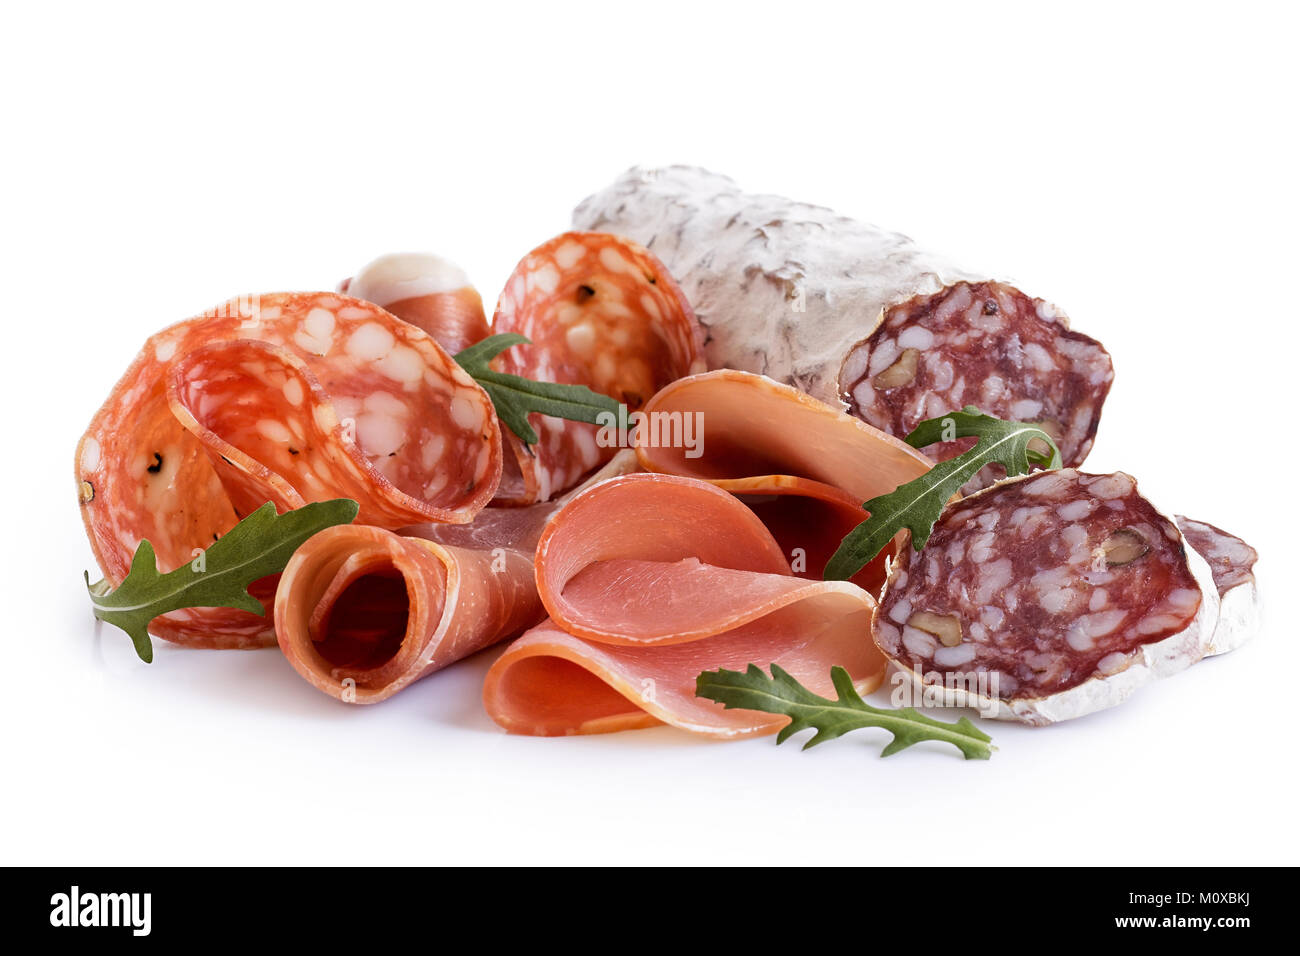 Mixed air cured sliced meats isolated on white. Rocket garnish. Stock Photo